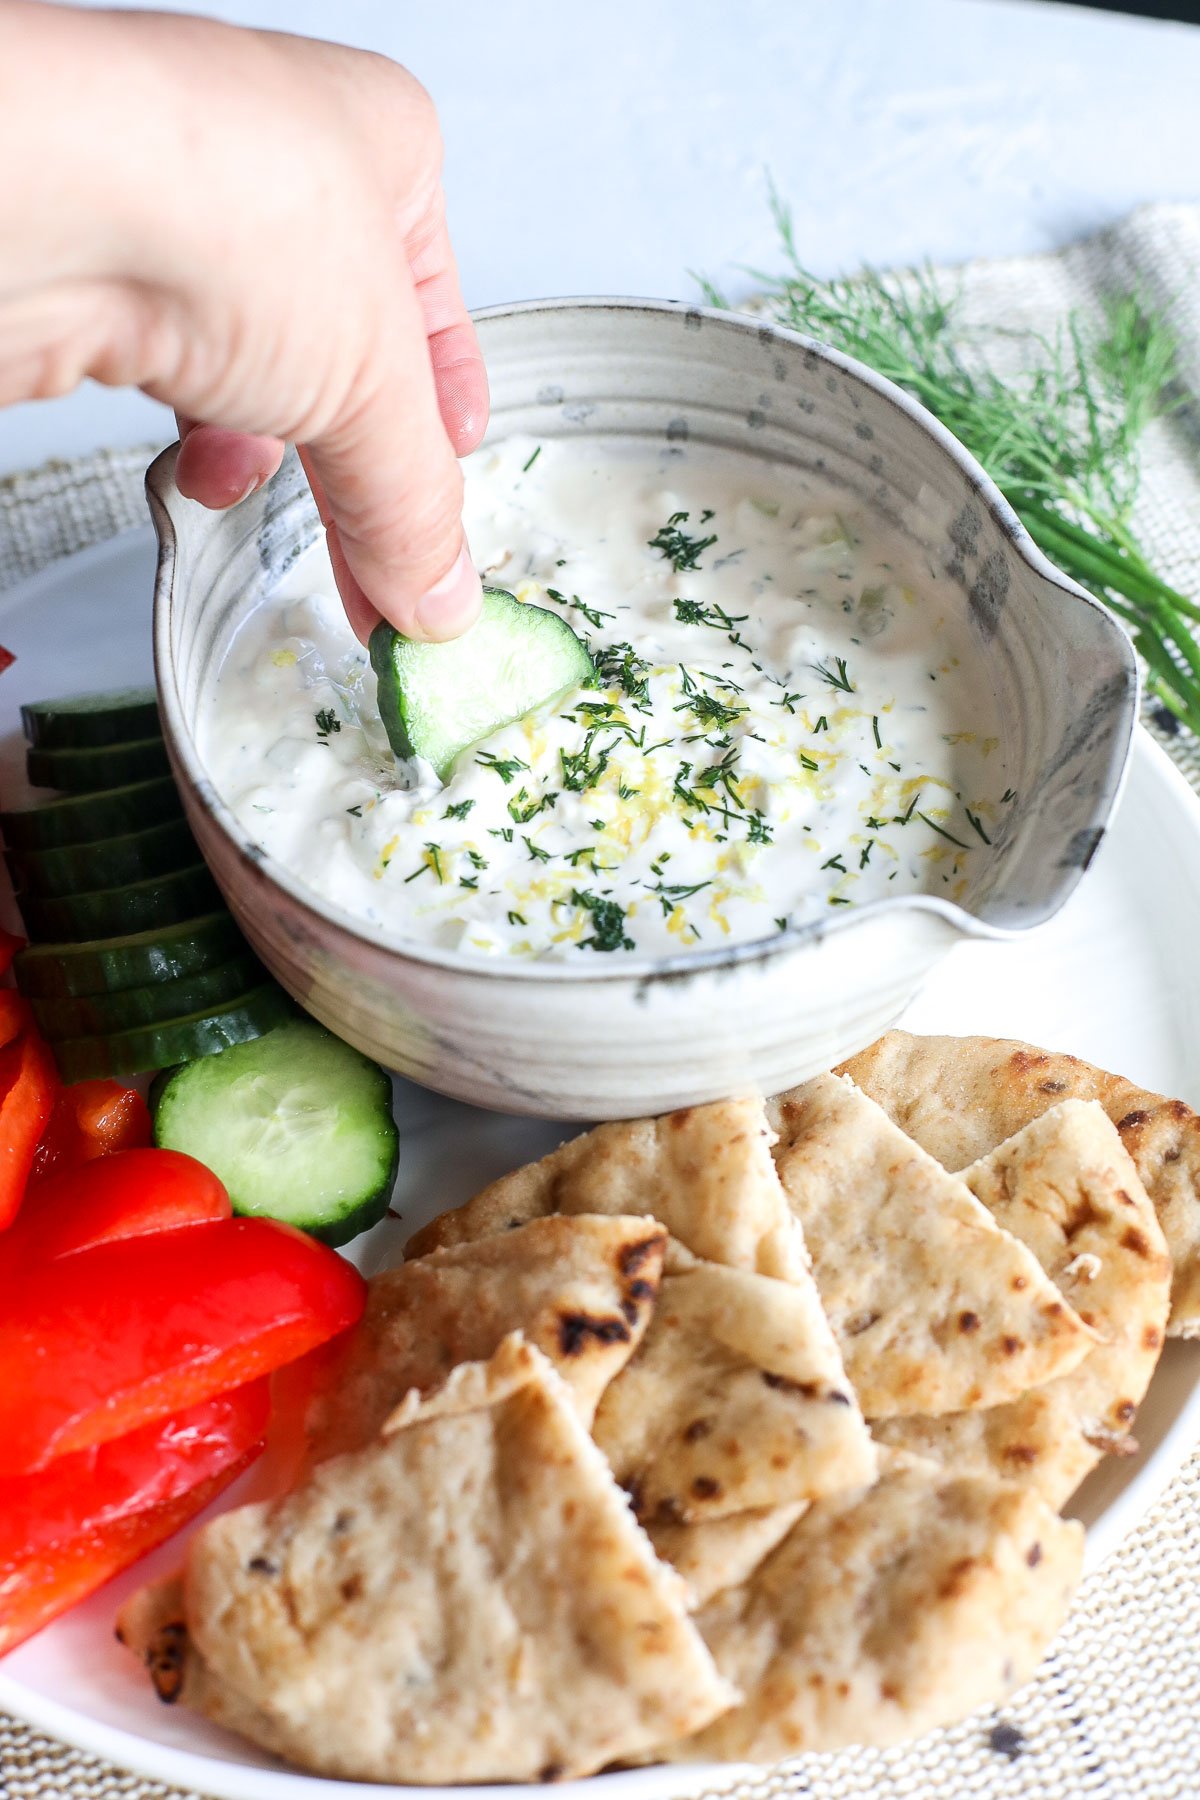 Elevate your snacking with High Protein Tahini Tzatziki—blending cottage cheese and Greek yogurt for a flavorful dip! Try it now!